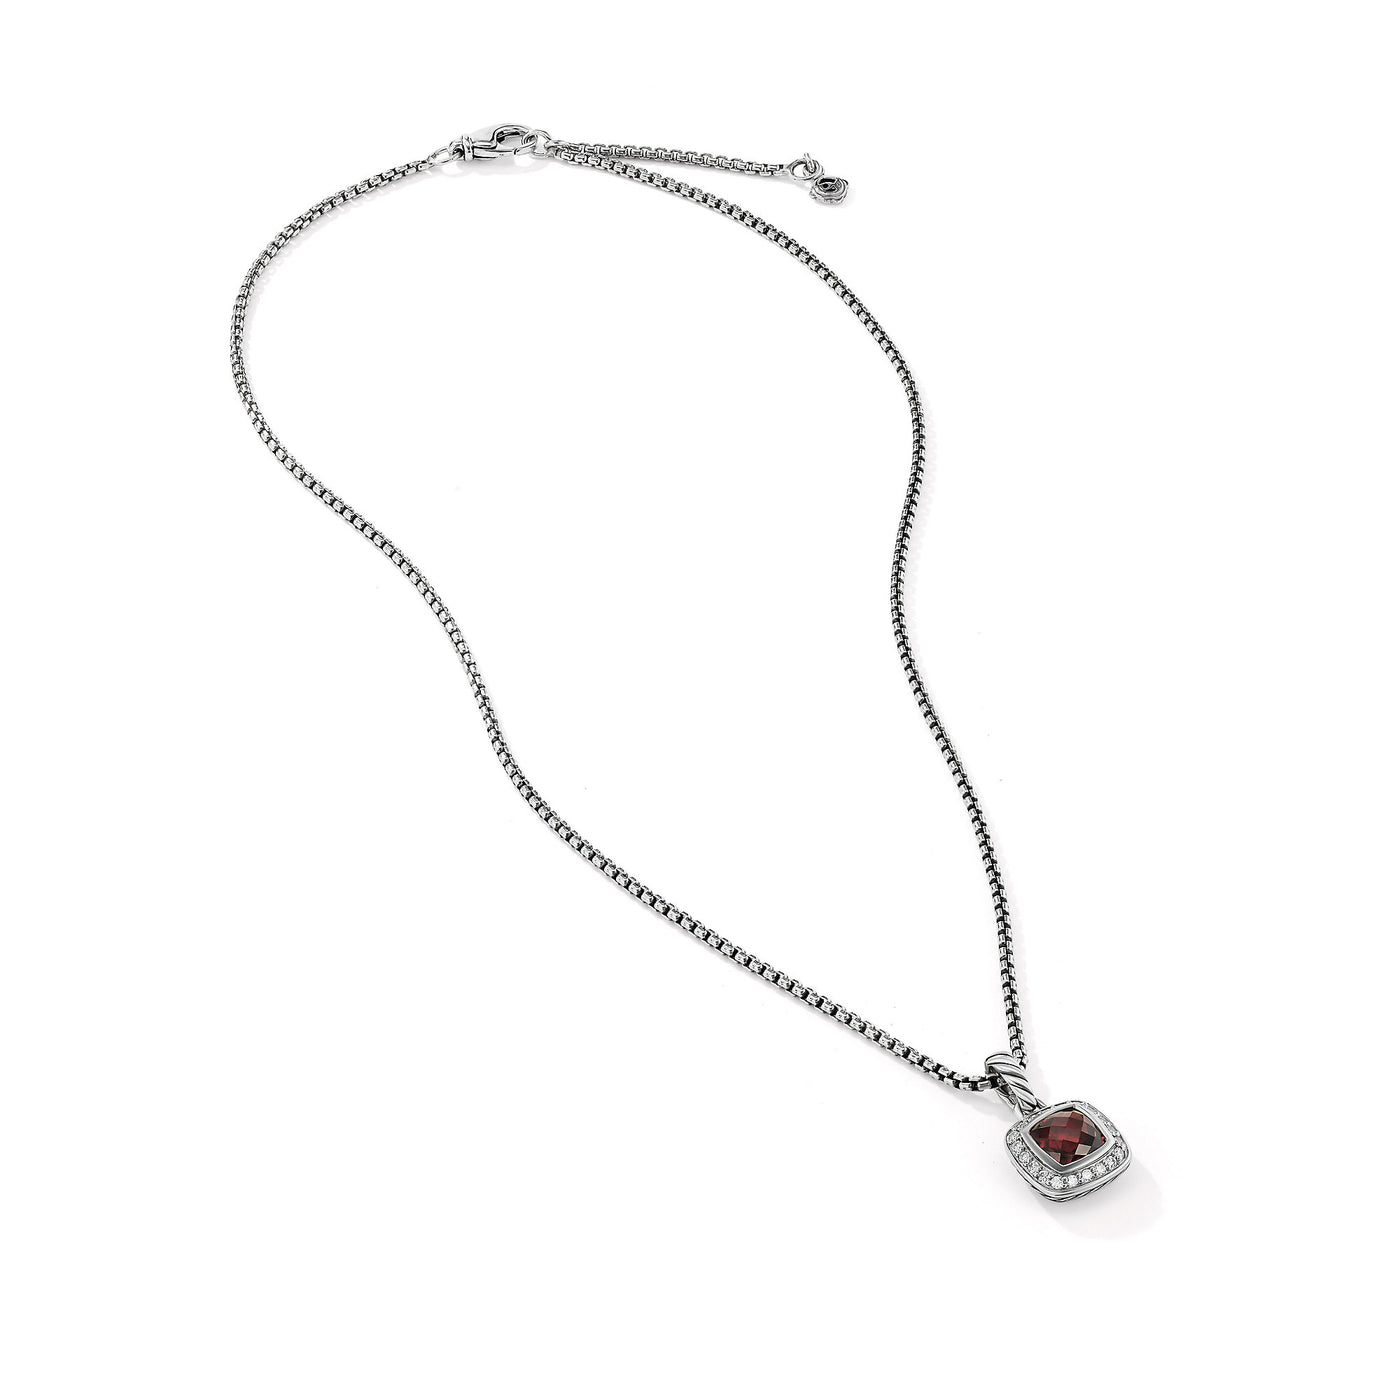 Petite Albion® Pendant Necklace in Sterling Silver with Garnet and Diamonds, 7mm